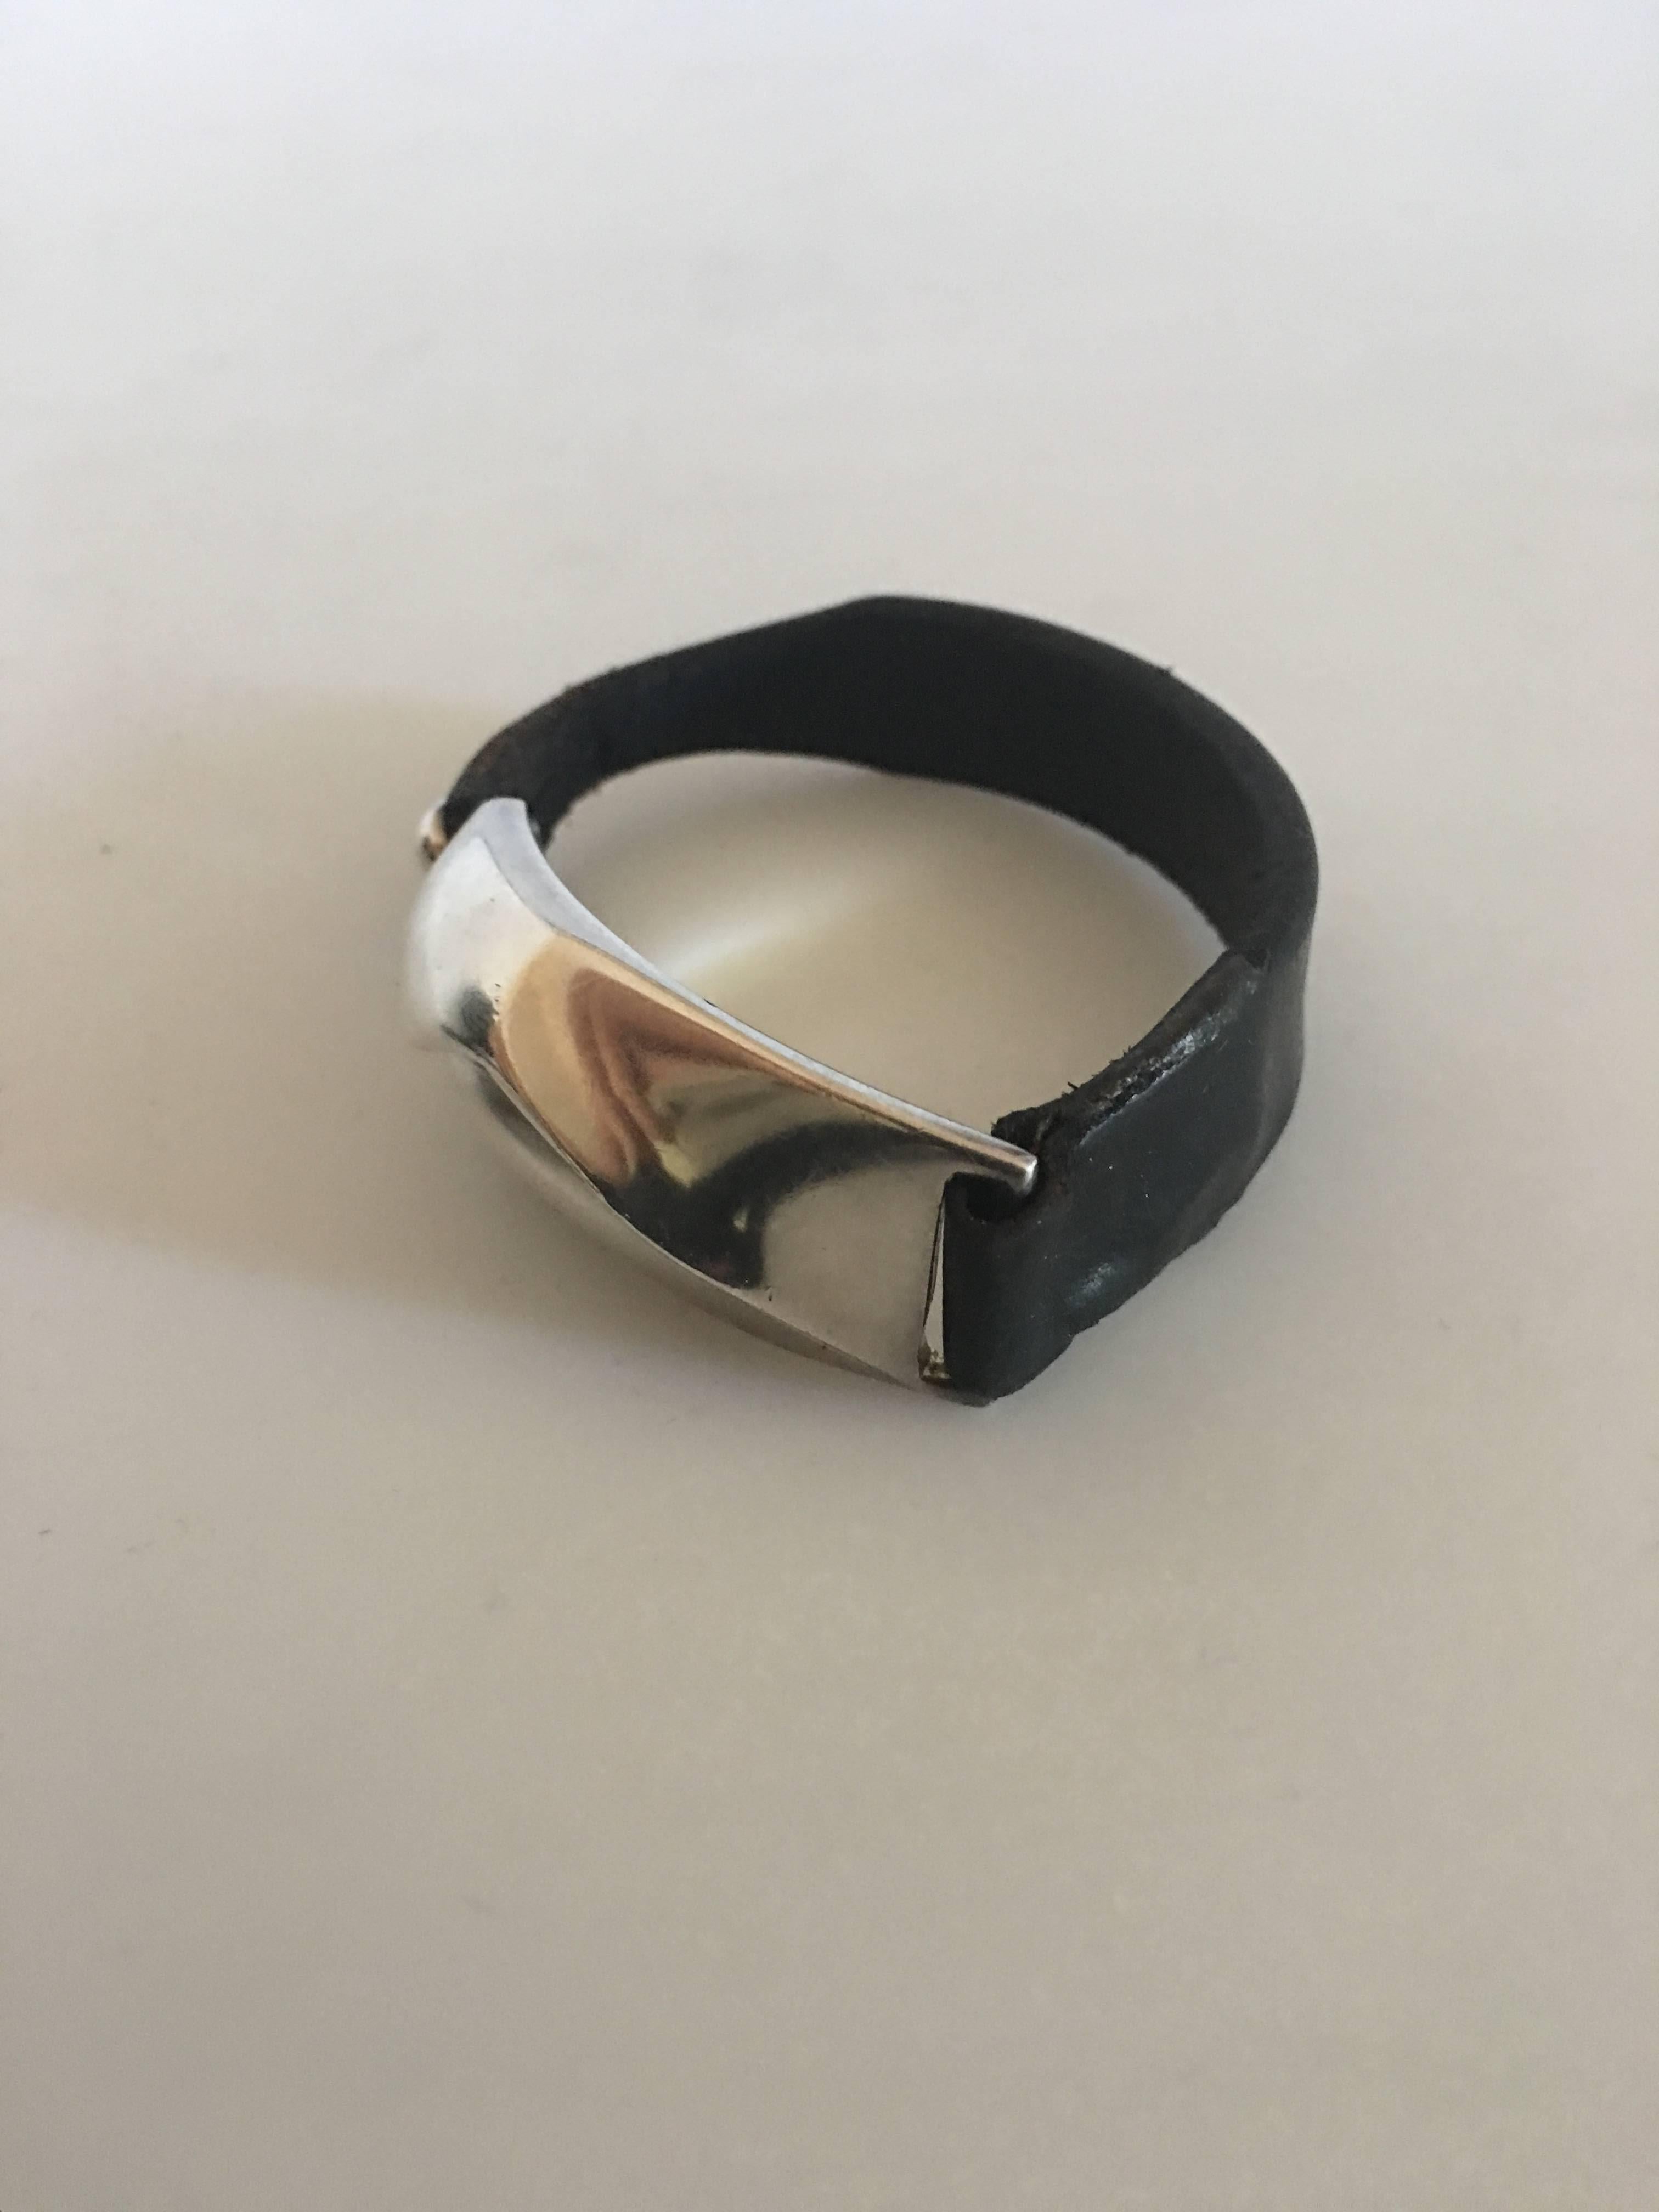 Lapponia Finland Leather Wristband with Sterling Silver Piece. 18 cm L (7 3/32